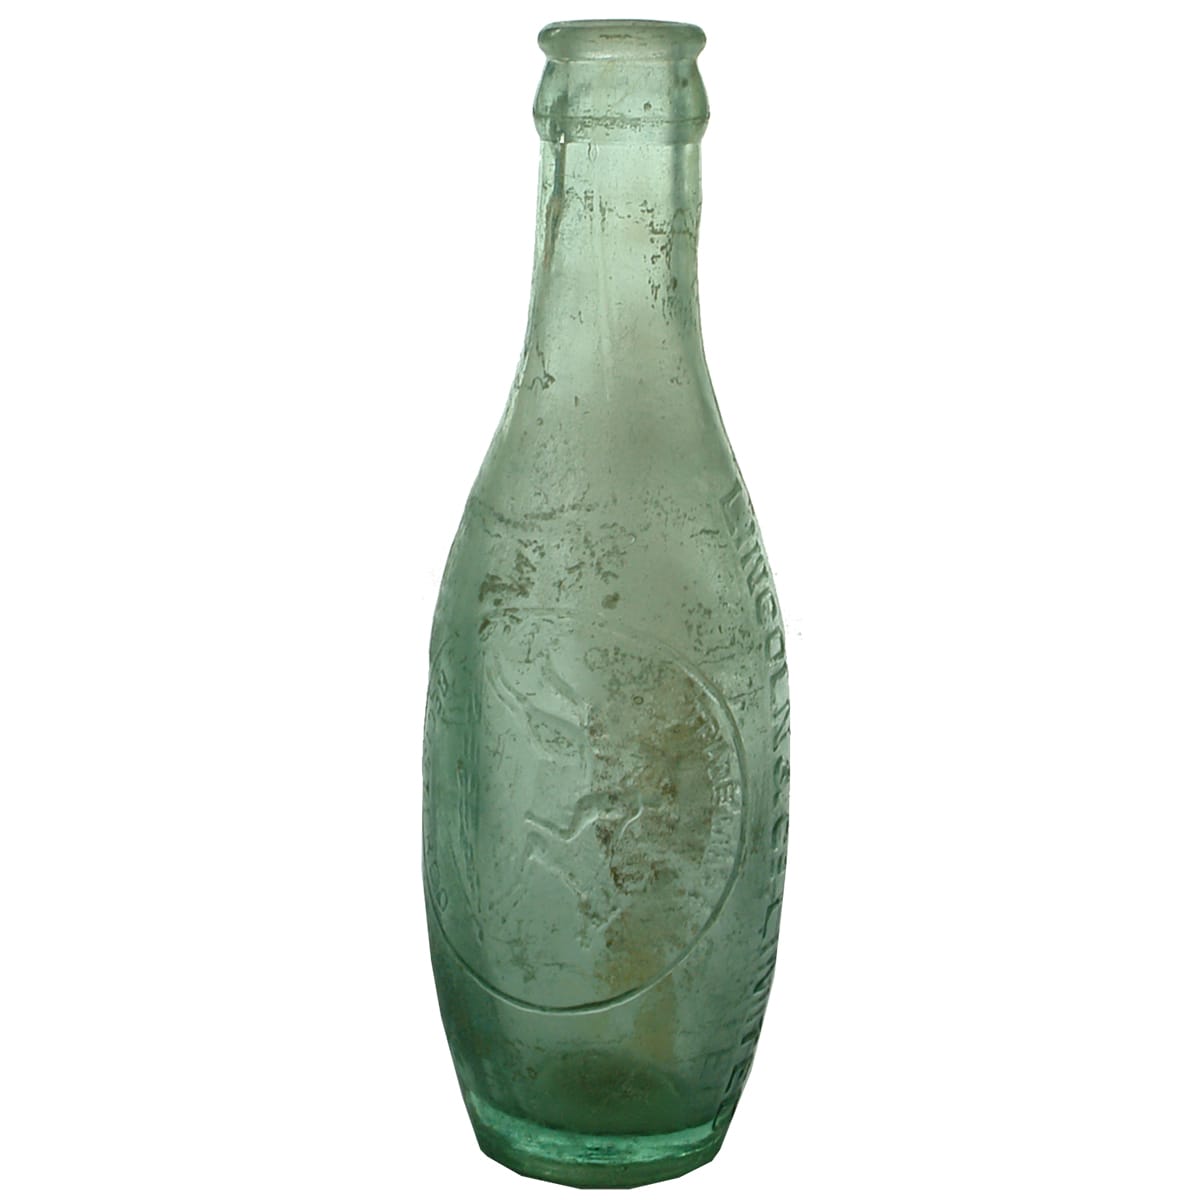 Skittle. Lincoln & Co Limited, Narrandera, Hay, Hillston, Jerilderie. Crown Seal. Aqua. 6 oz. (New South Wales)